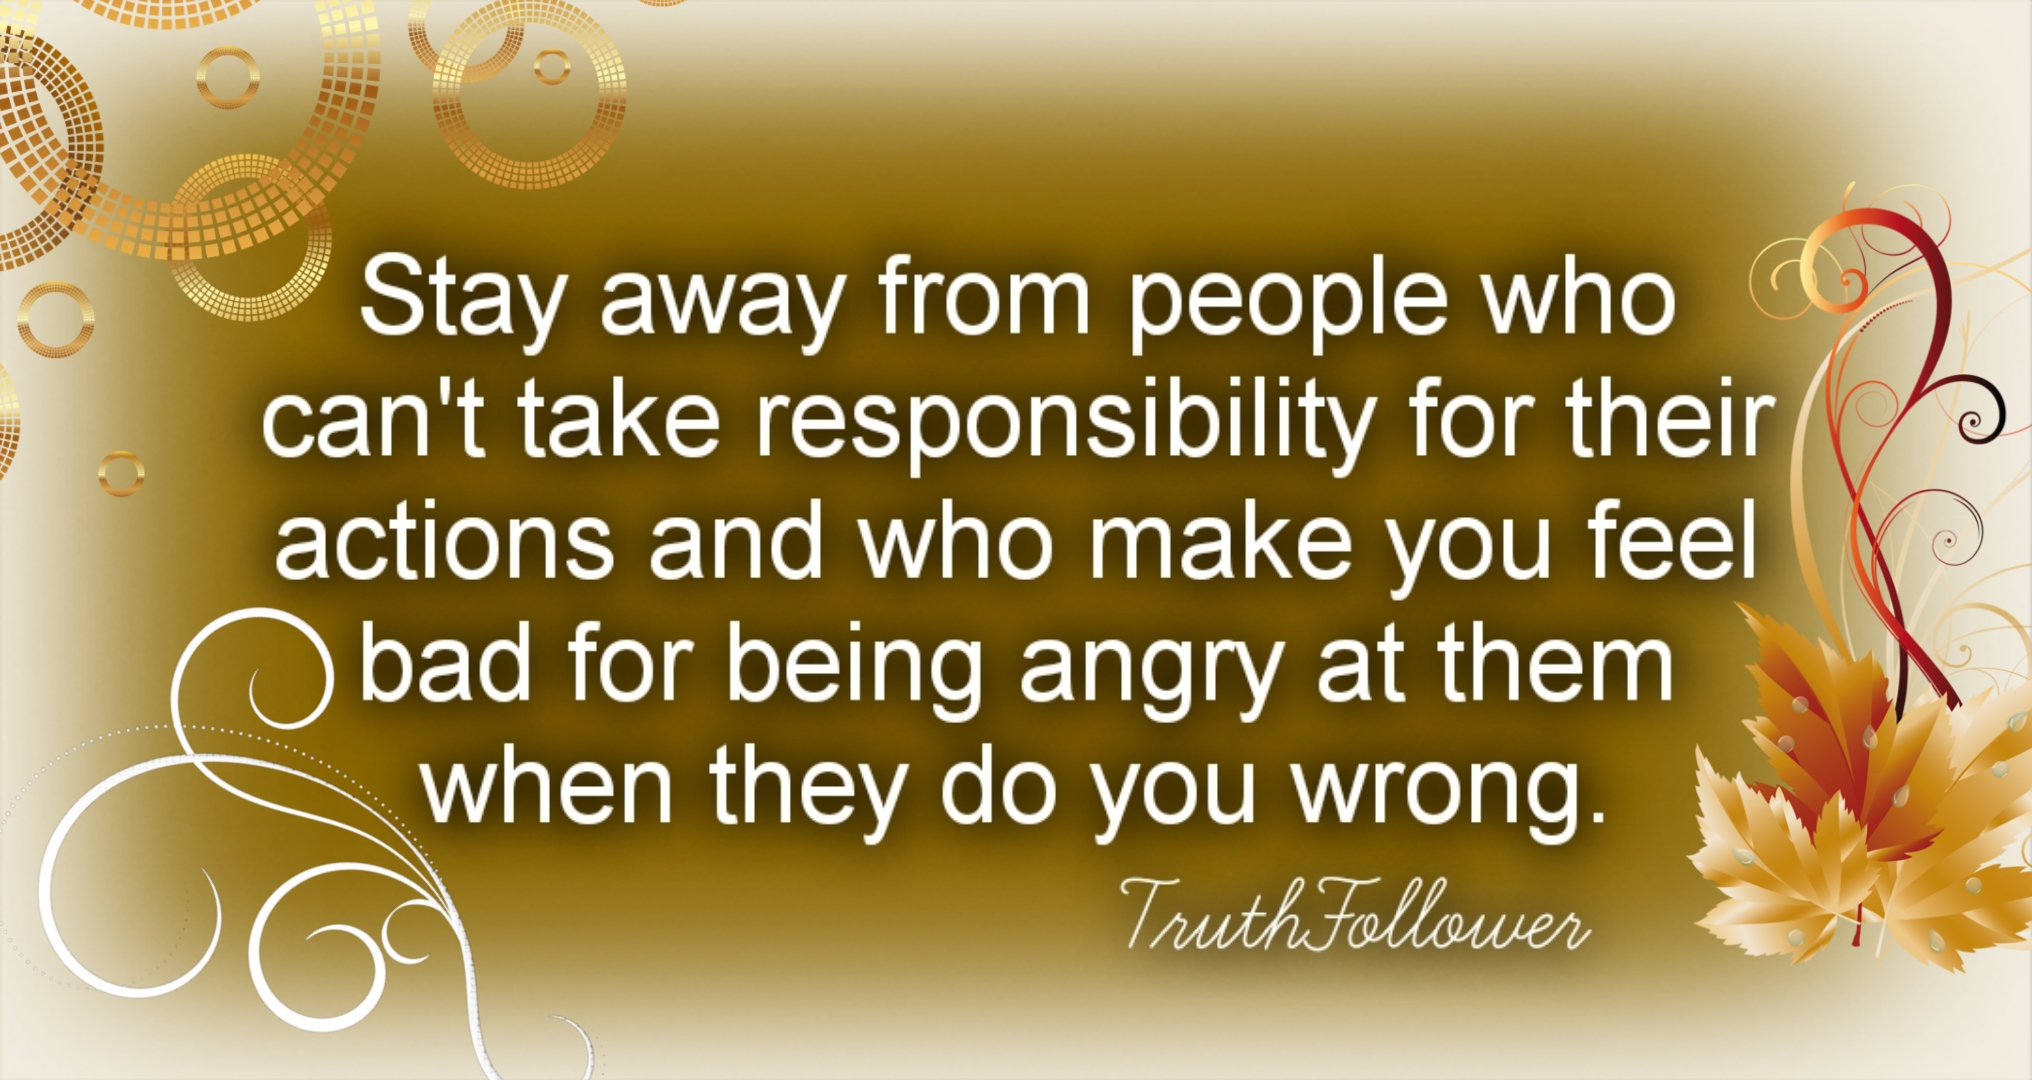 Be Responsible For Your Own Actions